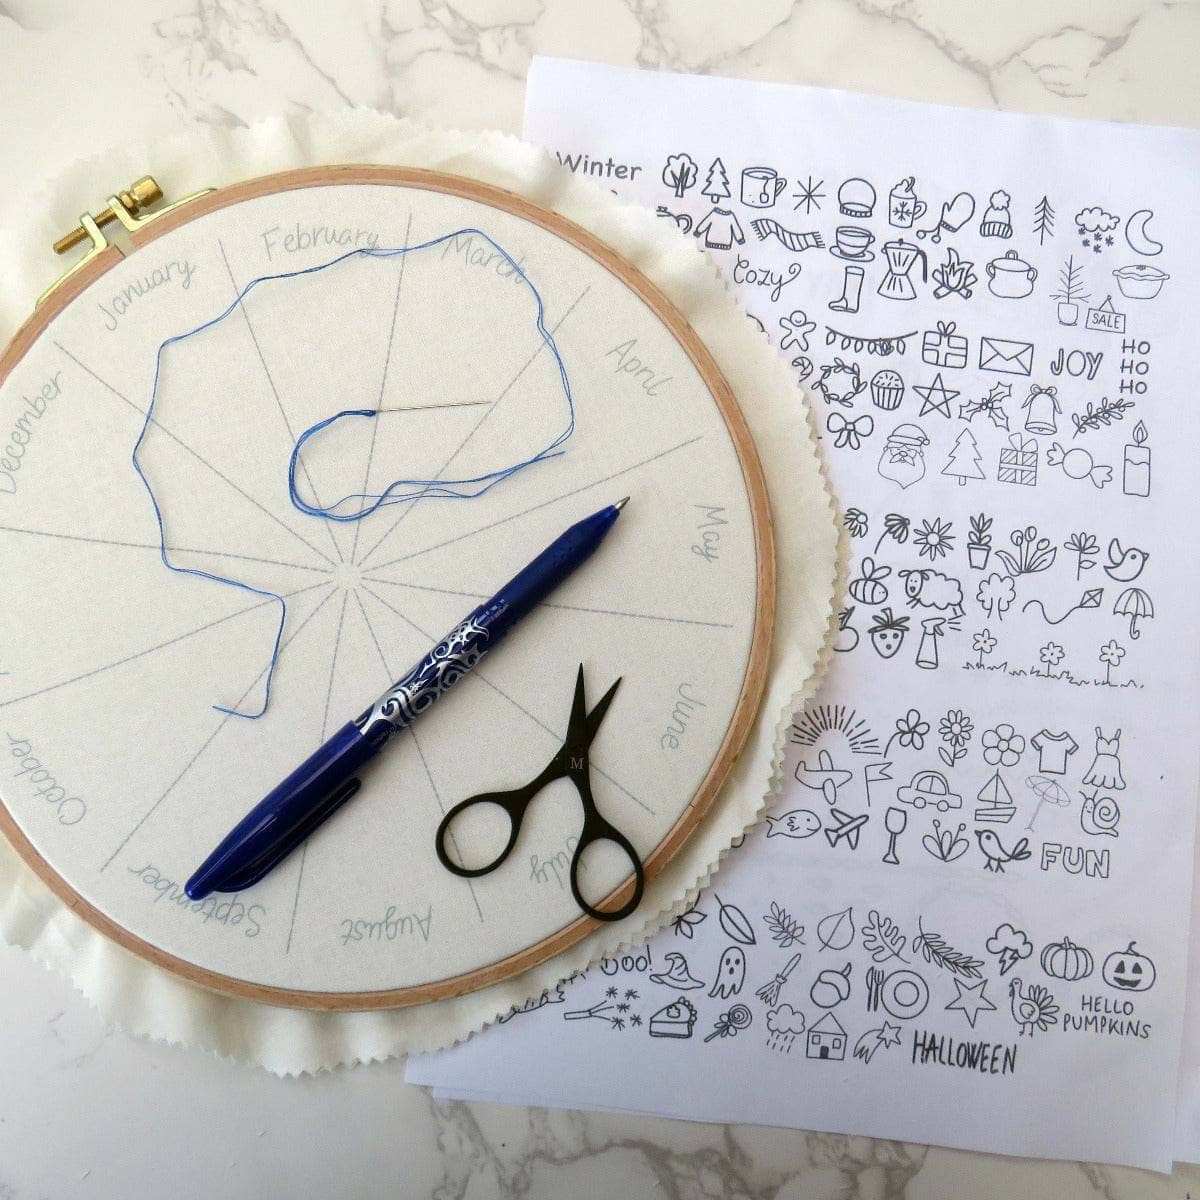 This Embroidery Journal Hand Embroidery Kit has been designed so you have everything you need to get started on this journey